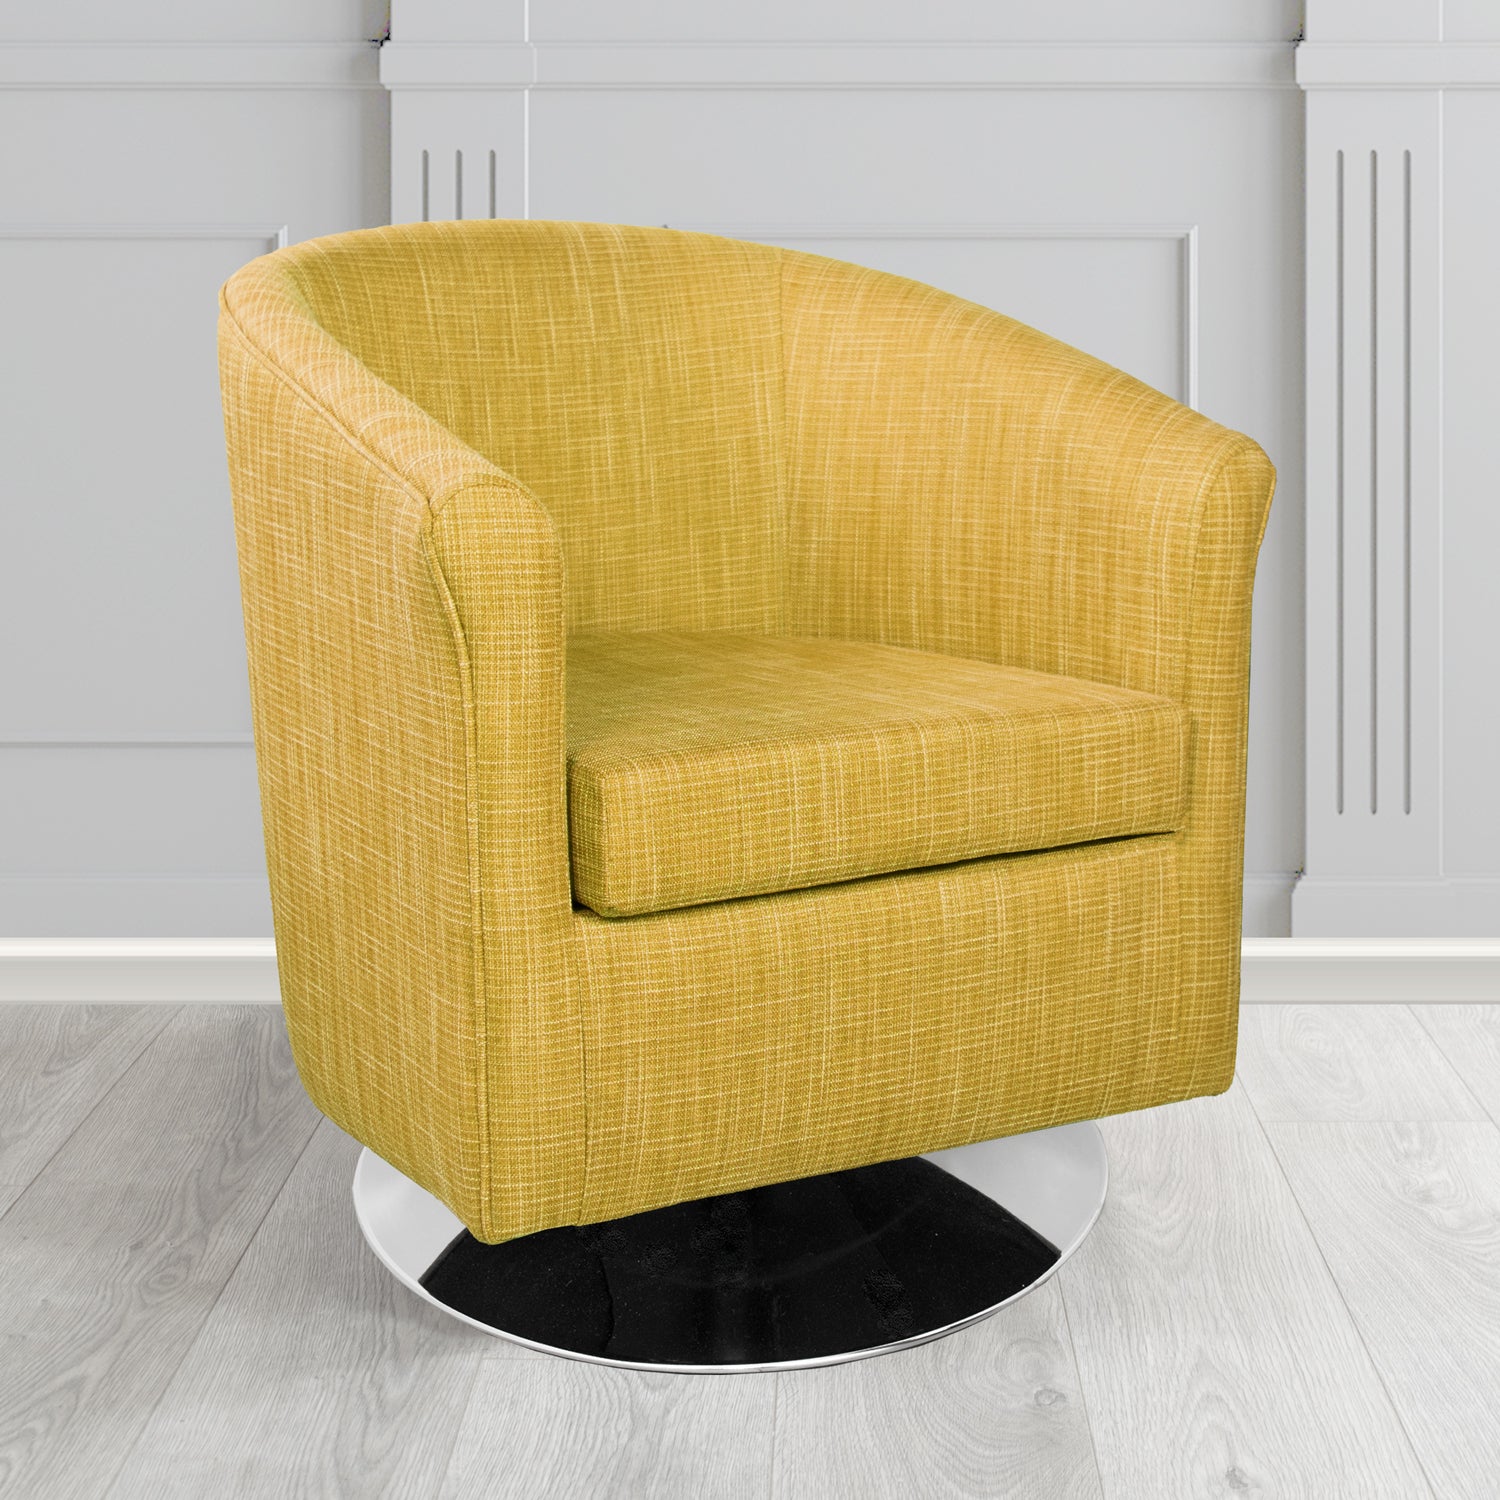 Tuscany Ravel Naples Contract Crib 5 Fabric Swivel Tub Chair - Antimicrobial & Water-Resistant - The Tub Chair Shop